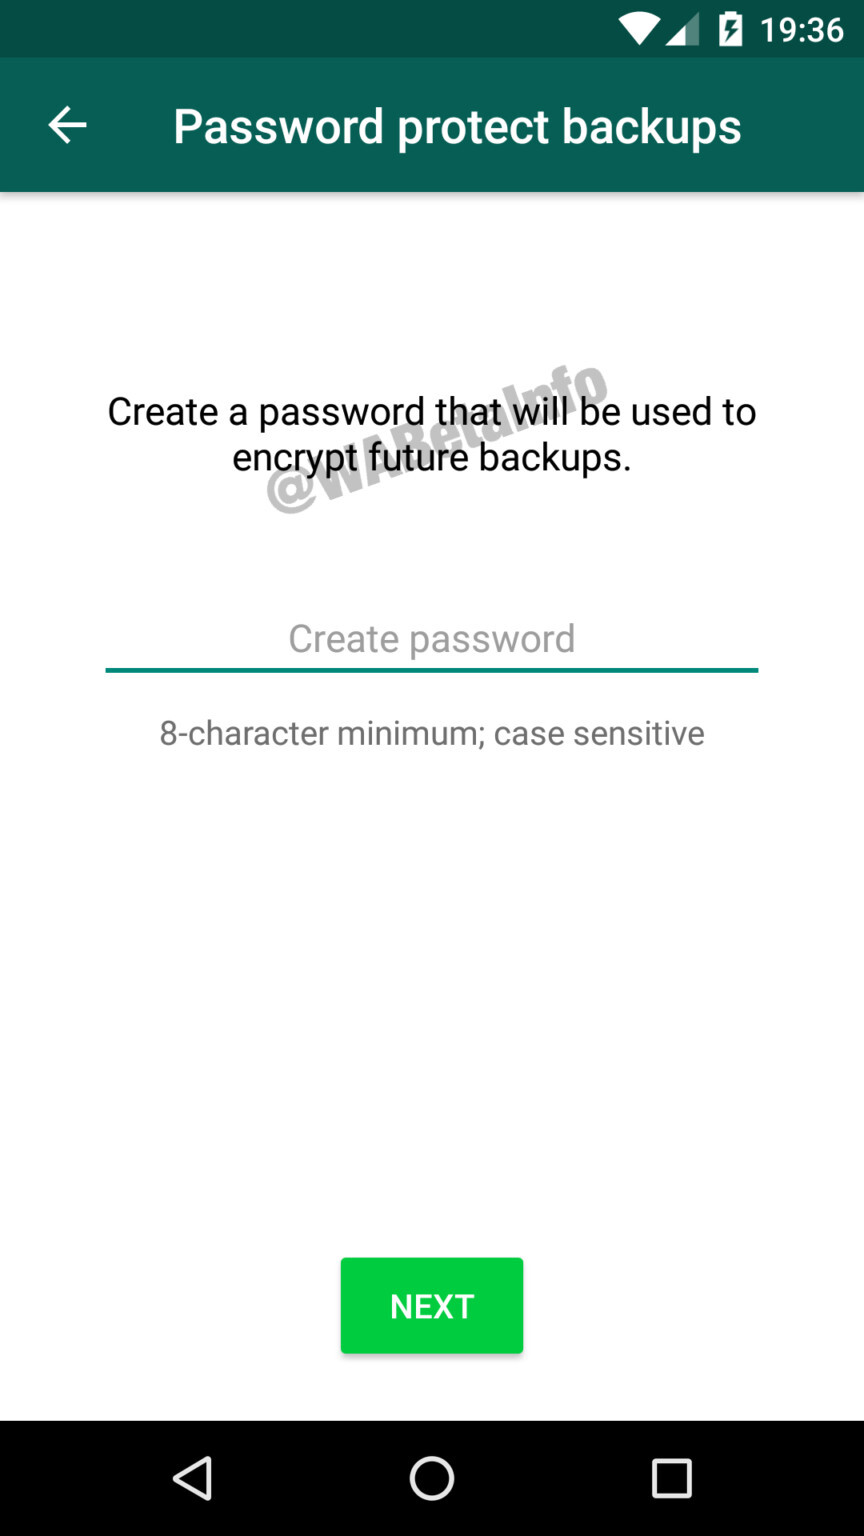 Last but not least: here comes the more secure password-protected backup option. The feature to backup your chat history is already available for WhatsApp users and the data is saved to Google Drive, but with the new update, you will be able to protect your backups with a password. However, the password will not be stored on Google Drive, neither will it be synced to Facebook’s servers, so if you forget it, you won’t be able to access your data.